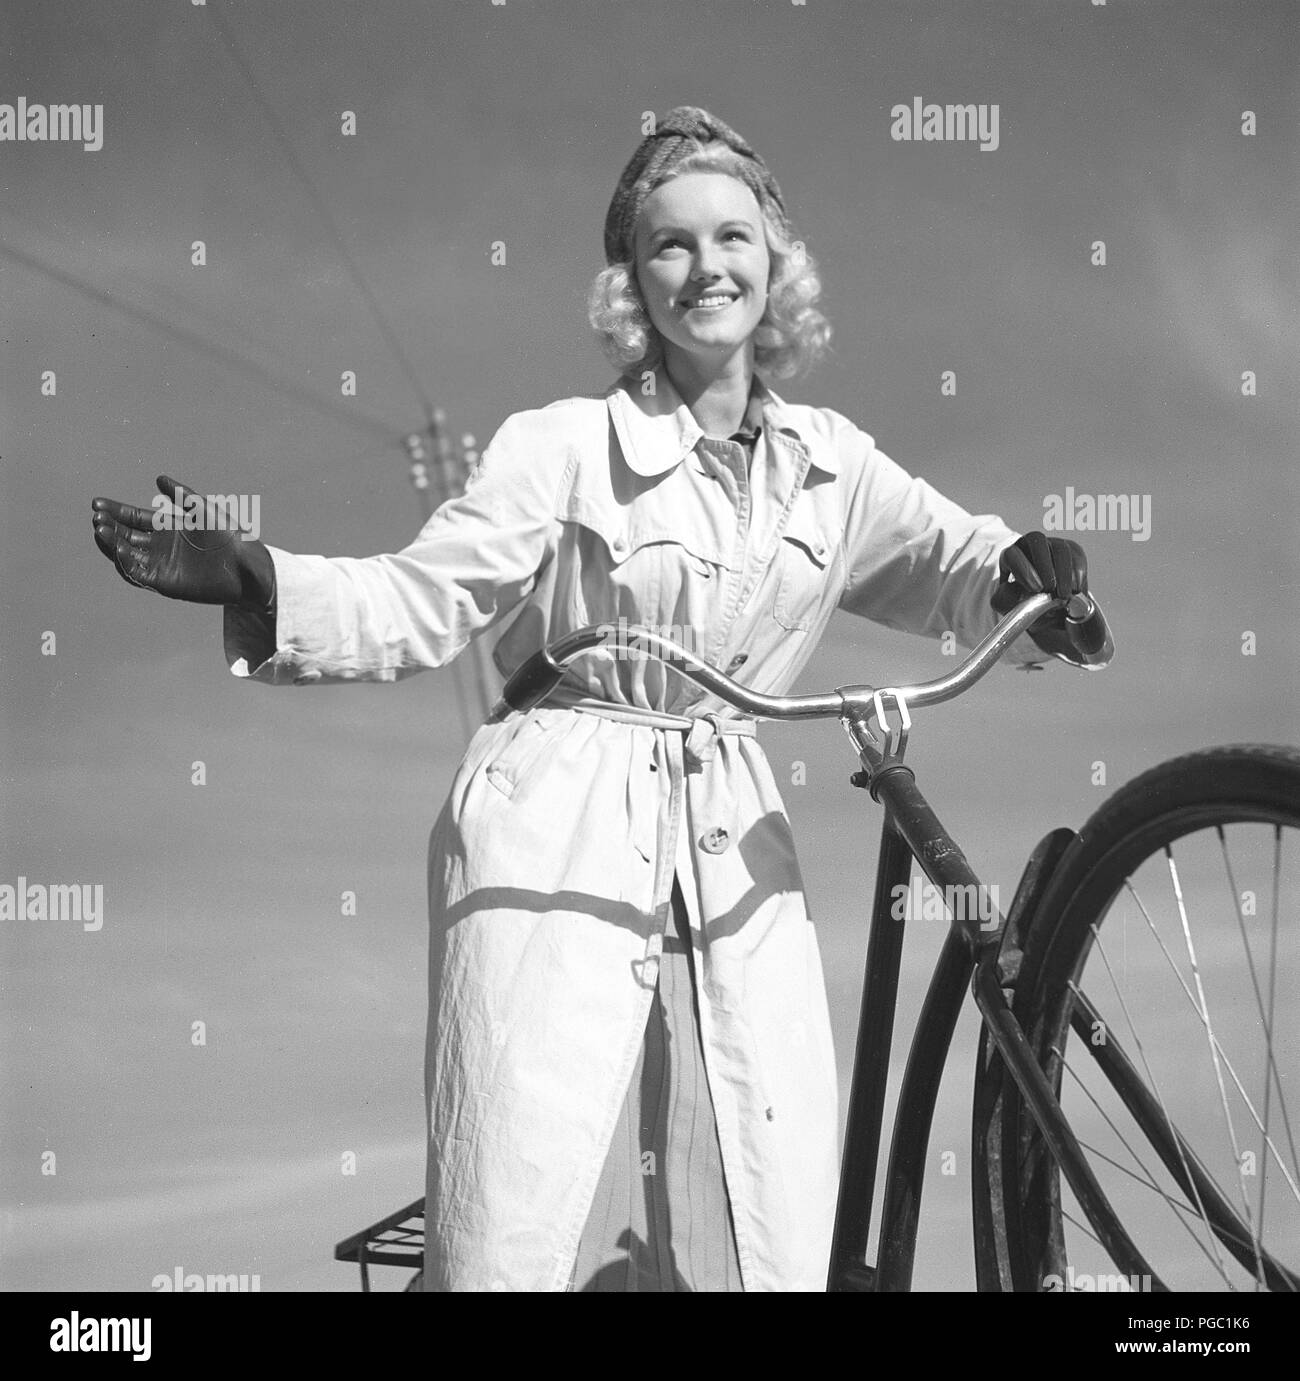 1940s woman on a bicycle. The Swedish actress Karin Nordgren is holding out her hand to give sign that she will turn right. Sweden 1940. Photo Kristoffersson 157-12 Stock Photo